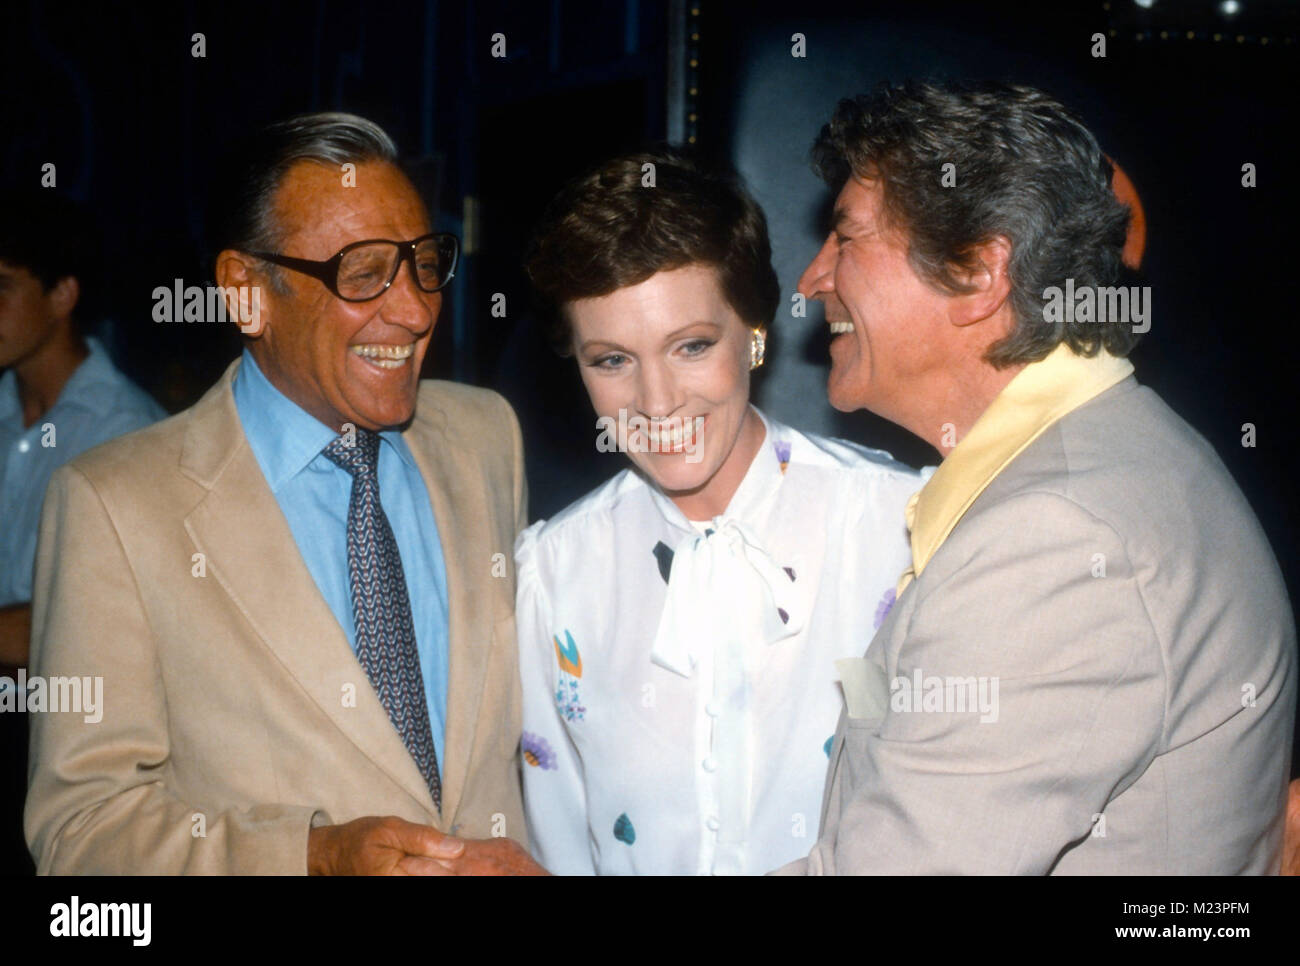 MALIBU, CA - JUNE 26: (L-R) Actor William Holden, actress Julie Andrews and director Blake Edwards attend 'S.O.B.' screening on June 26, 1981 in Malibu, California. Photo by Barry King/Alamy Stock Photo Stock Photo